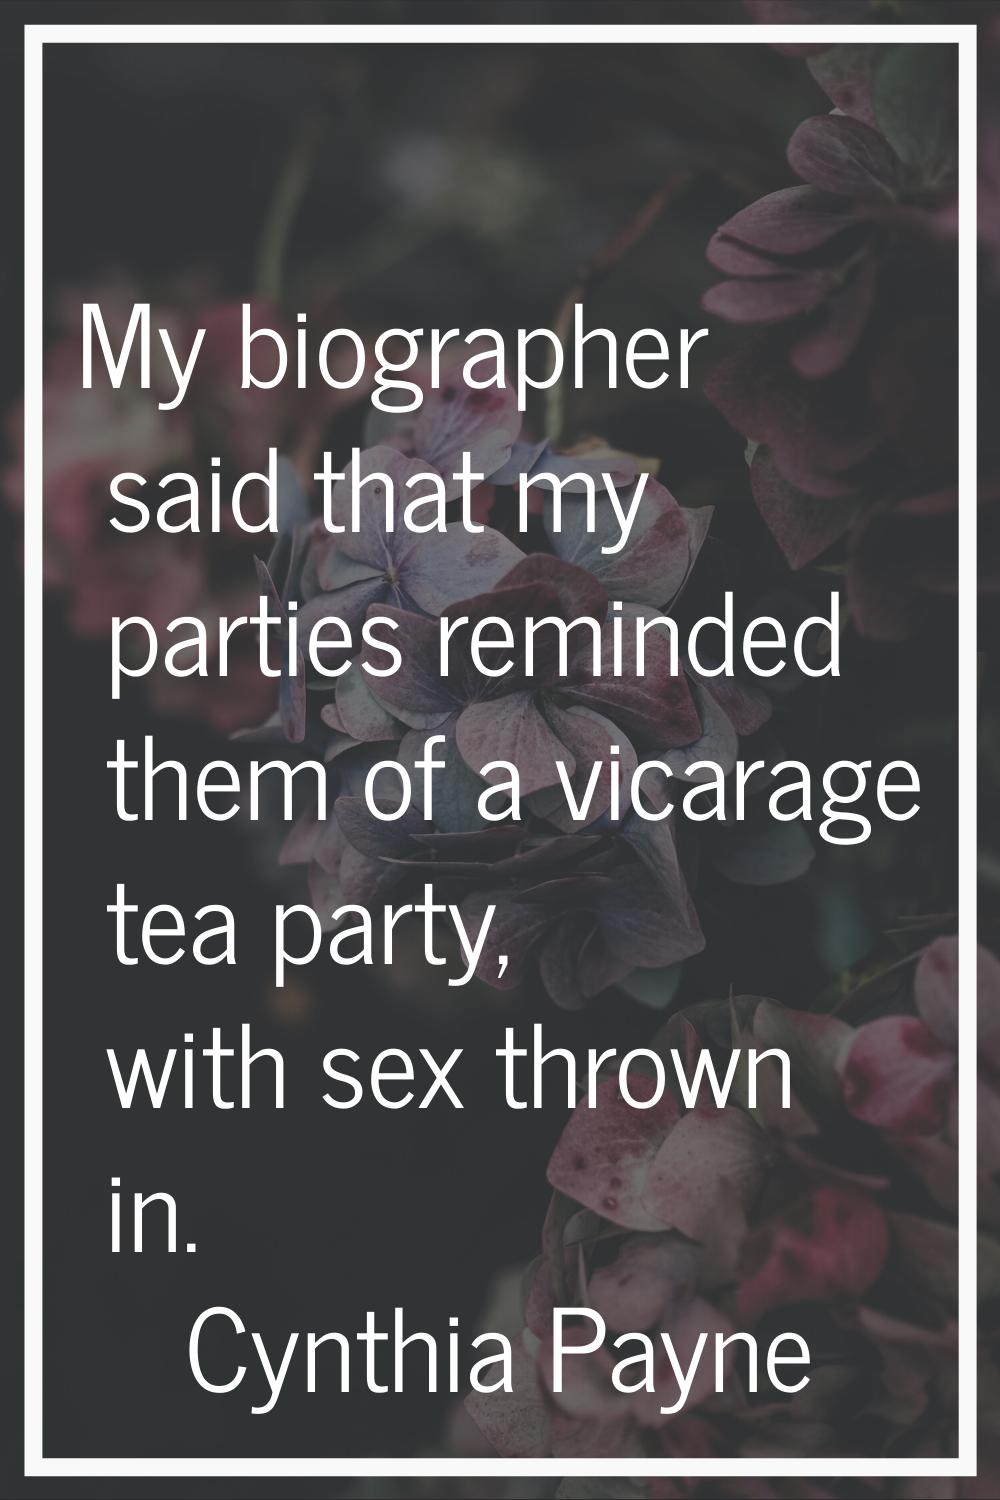 My biographer said that my parties reminded them of a vicarage tea party, with sex thrown in.